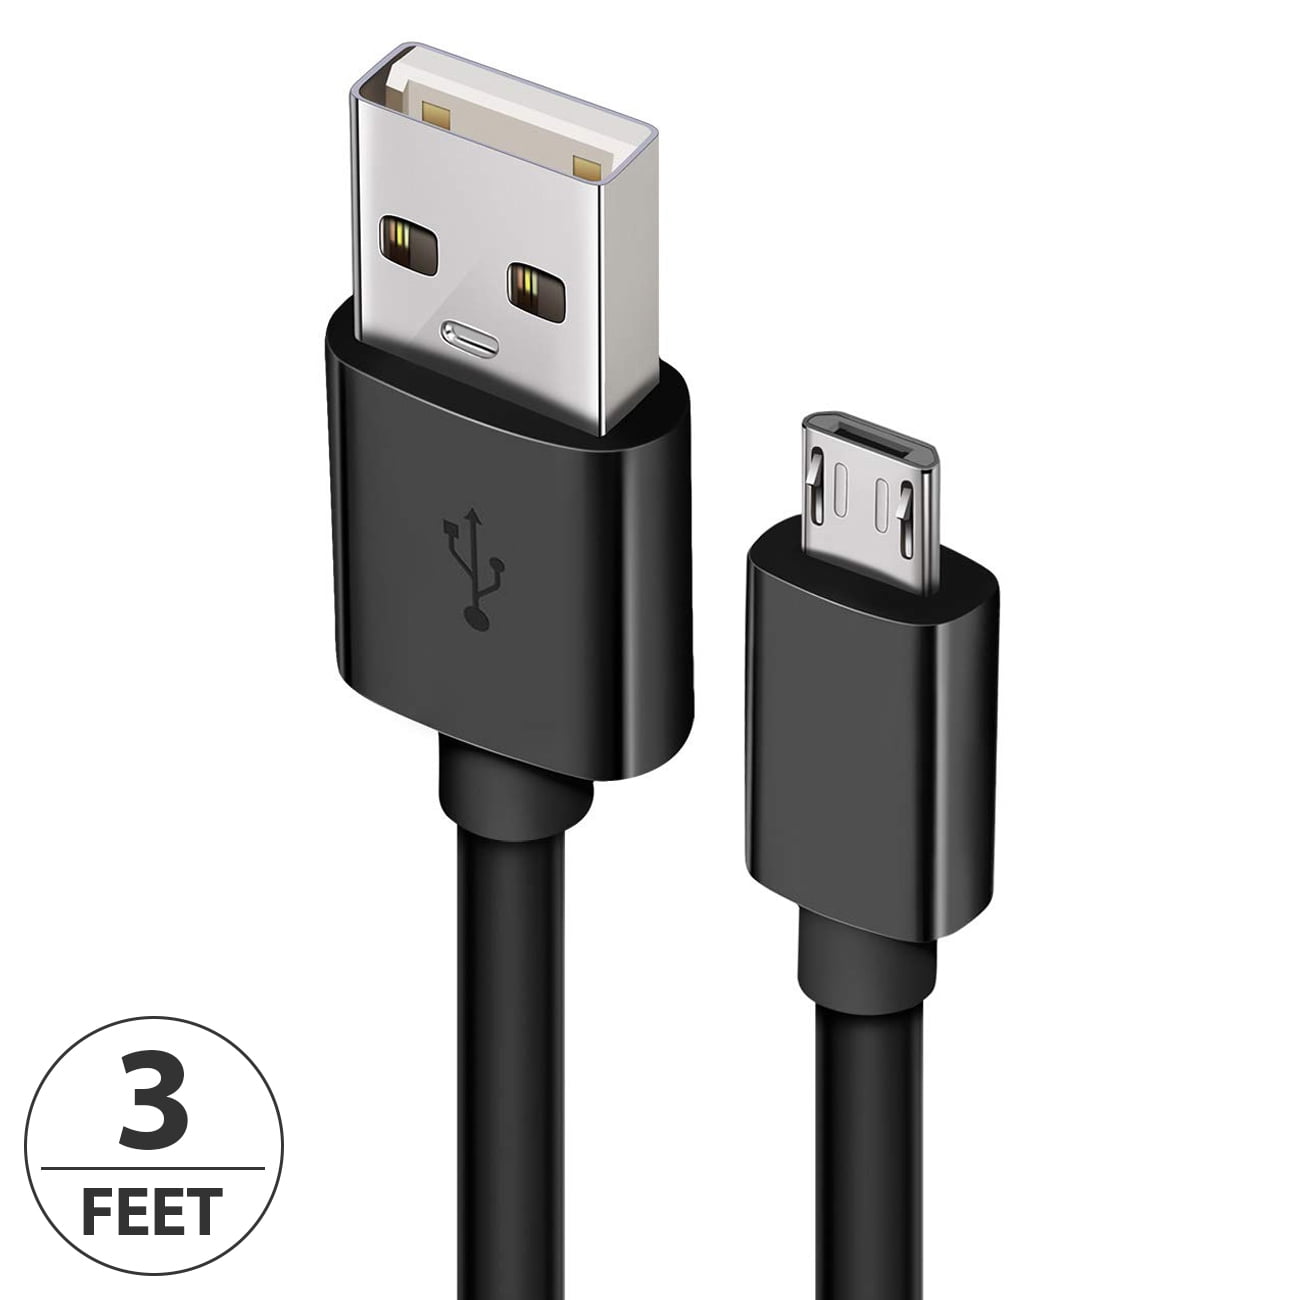 Stor Skru ned For tidlig Micro USB Cable Android 3FT, Borz USB to Micro USB Cables High-Speed USB2.0  Sync and Charging Cables for Samsung Galaxy S7 Edge/S6/S5/S4, Note  5/4/3HTC, Xbox, PS4, Nexus, MP3, Tablet and More -